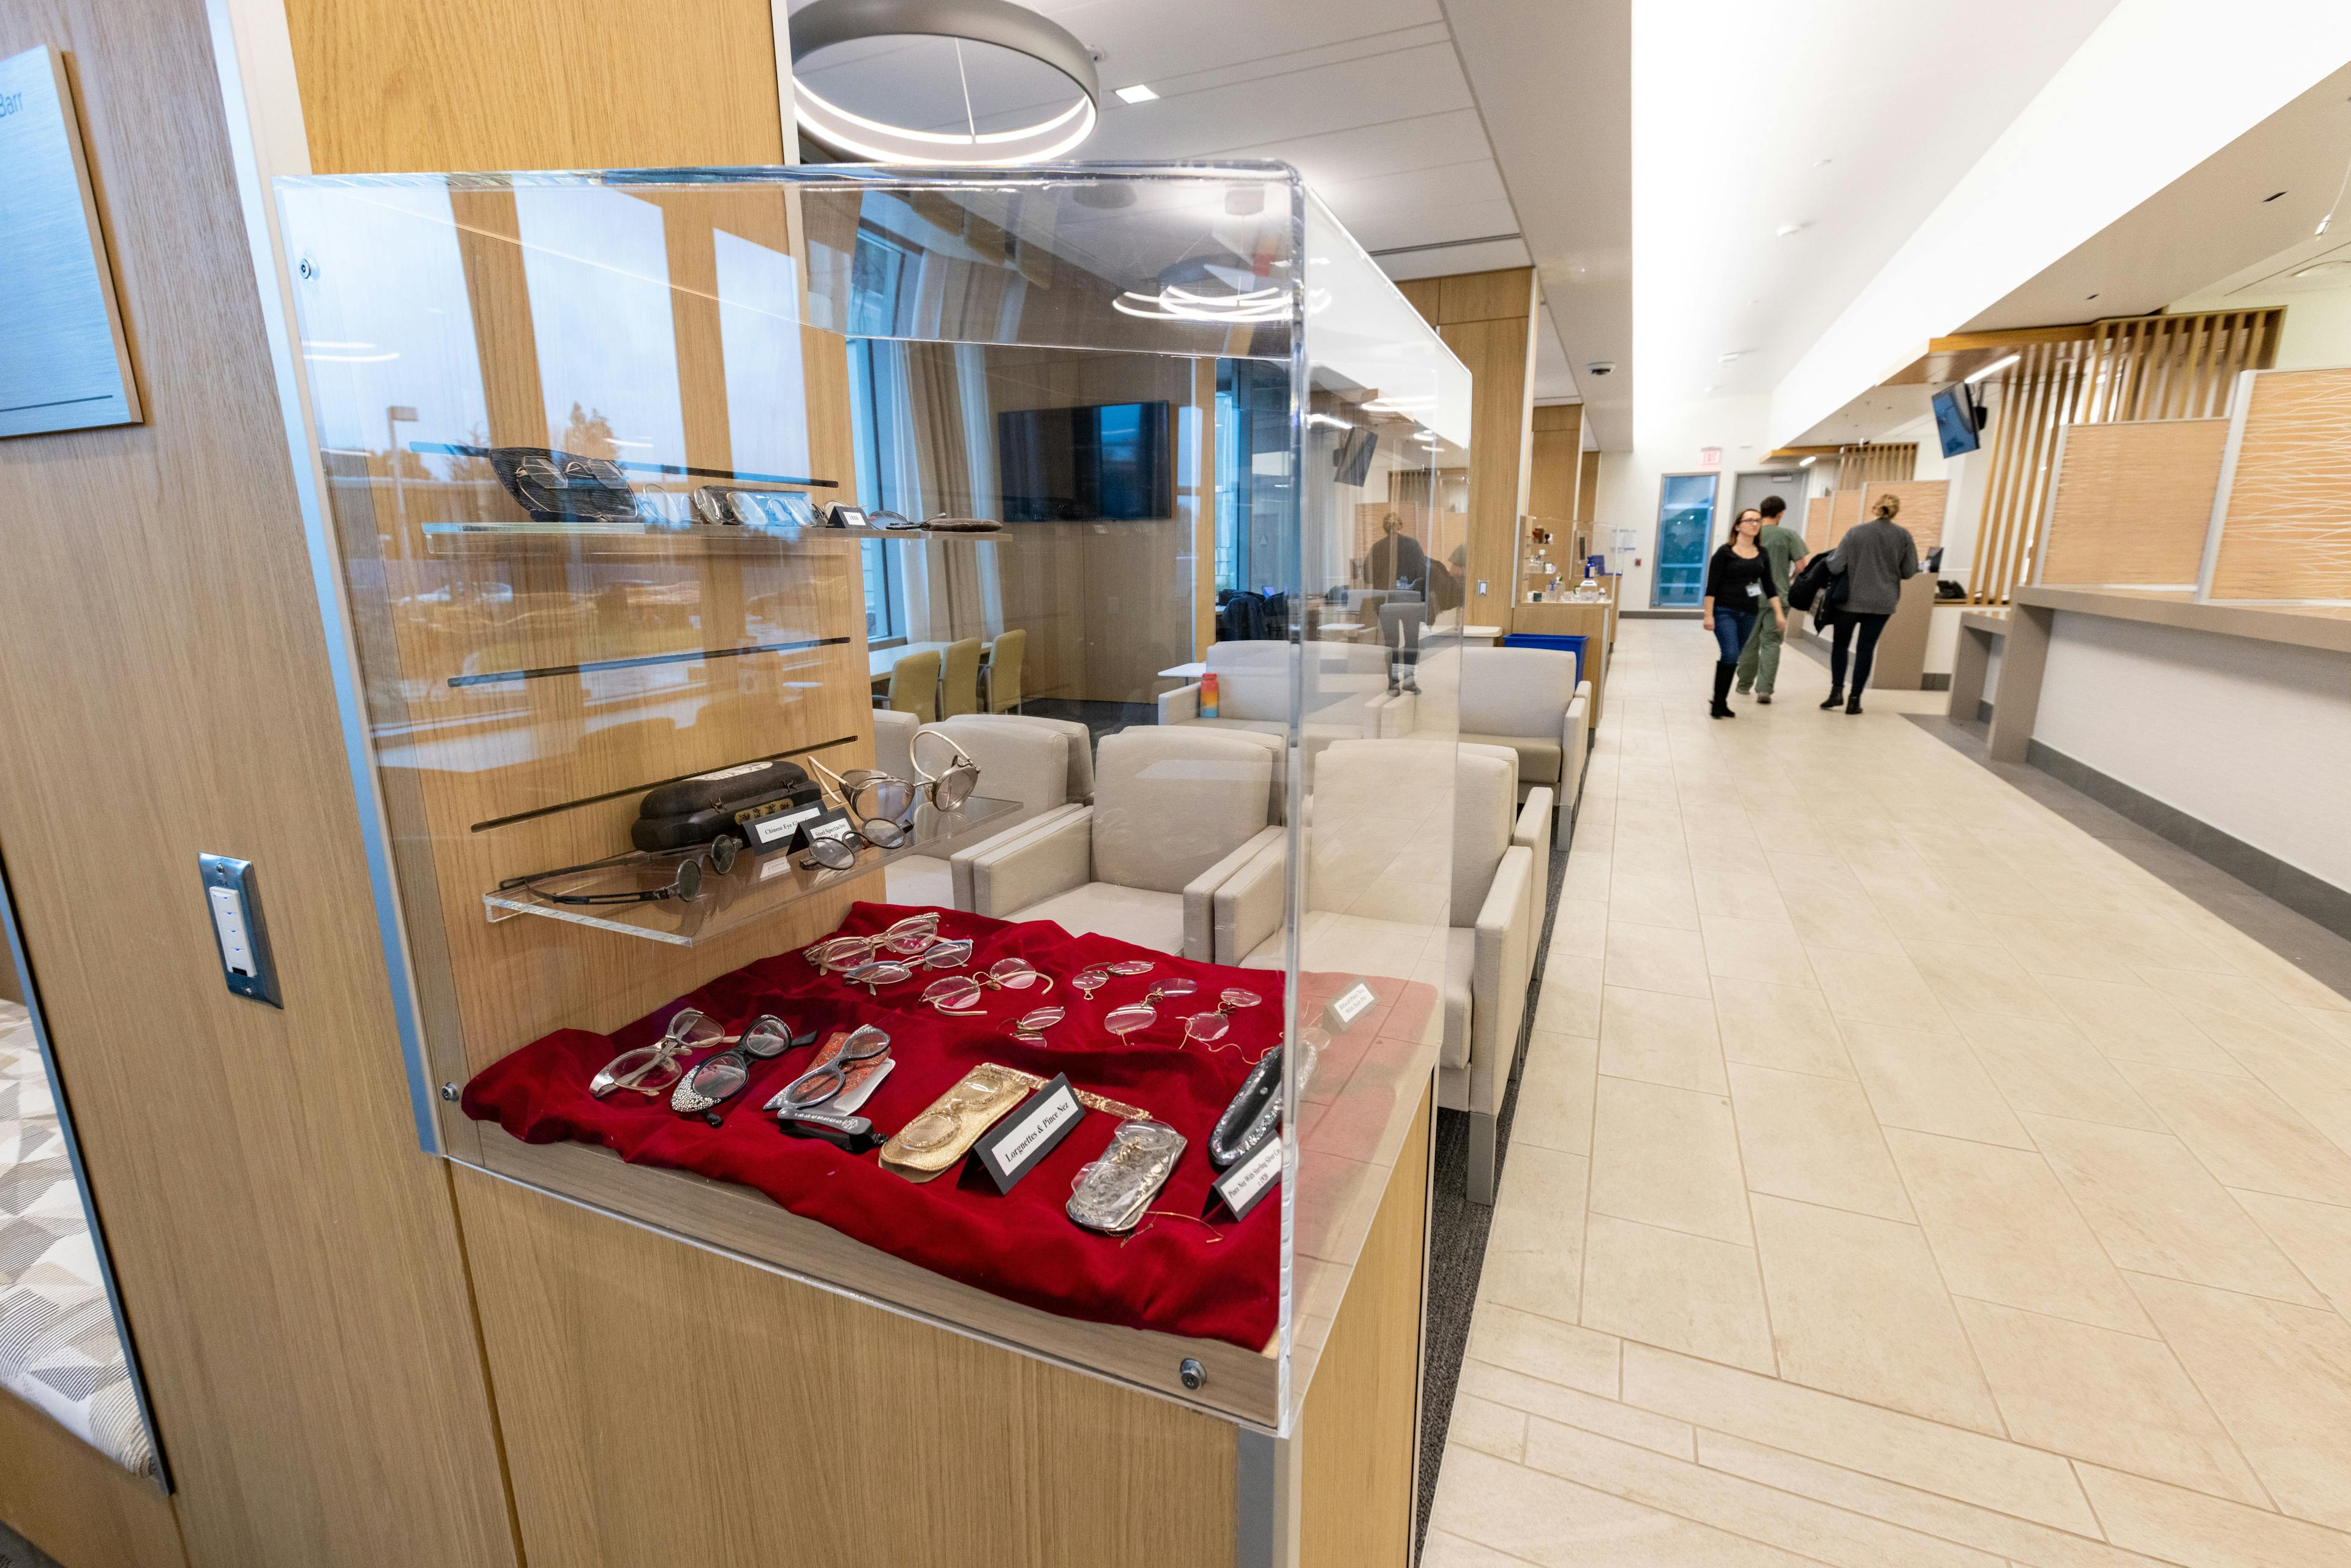 Common areas contain display cases with antique ophthalmology tools and eyewear. (Photos courtesy of UC Davis Health)